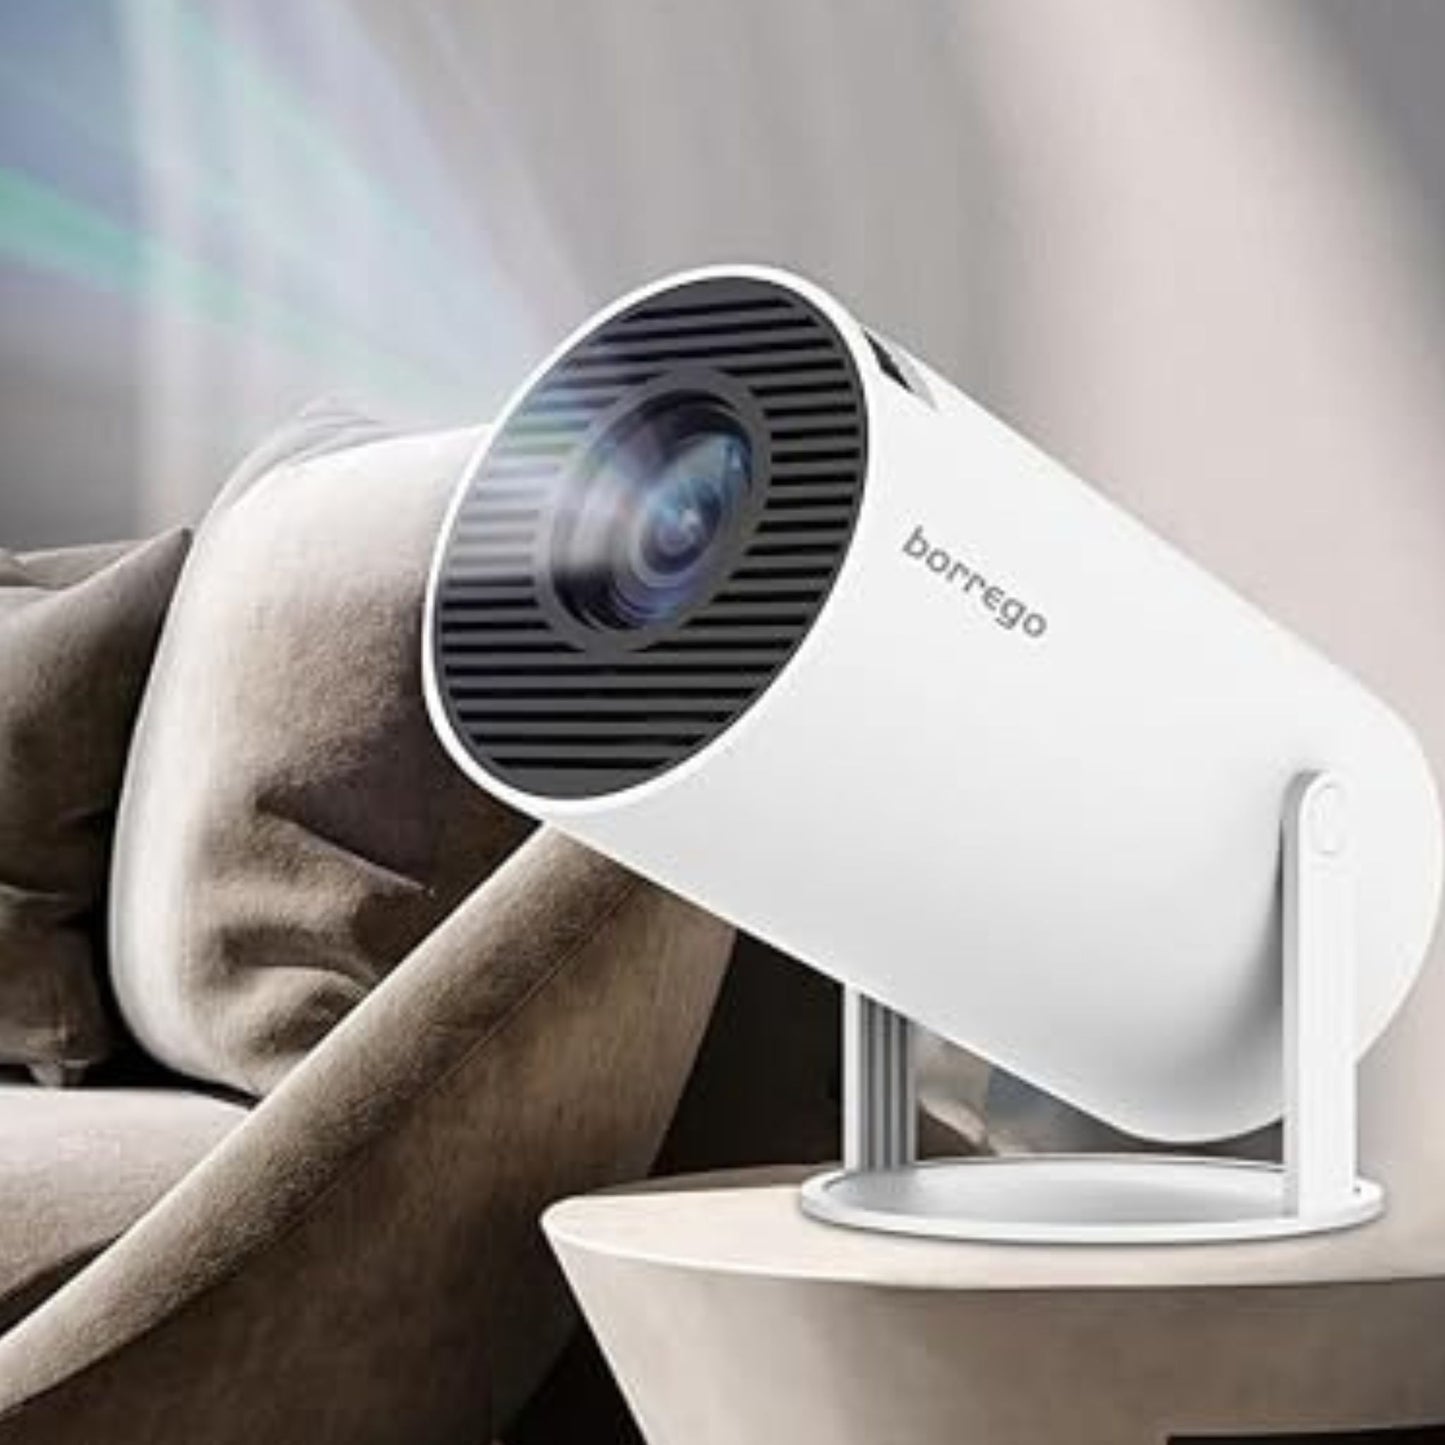 Borrego Smart 2 Pro Android Projector_LCD_Portable Wi Fi Android Model_White